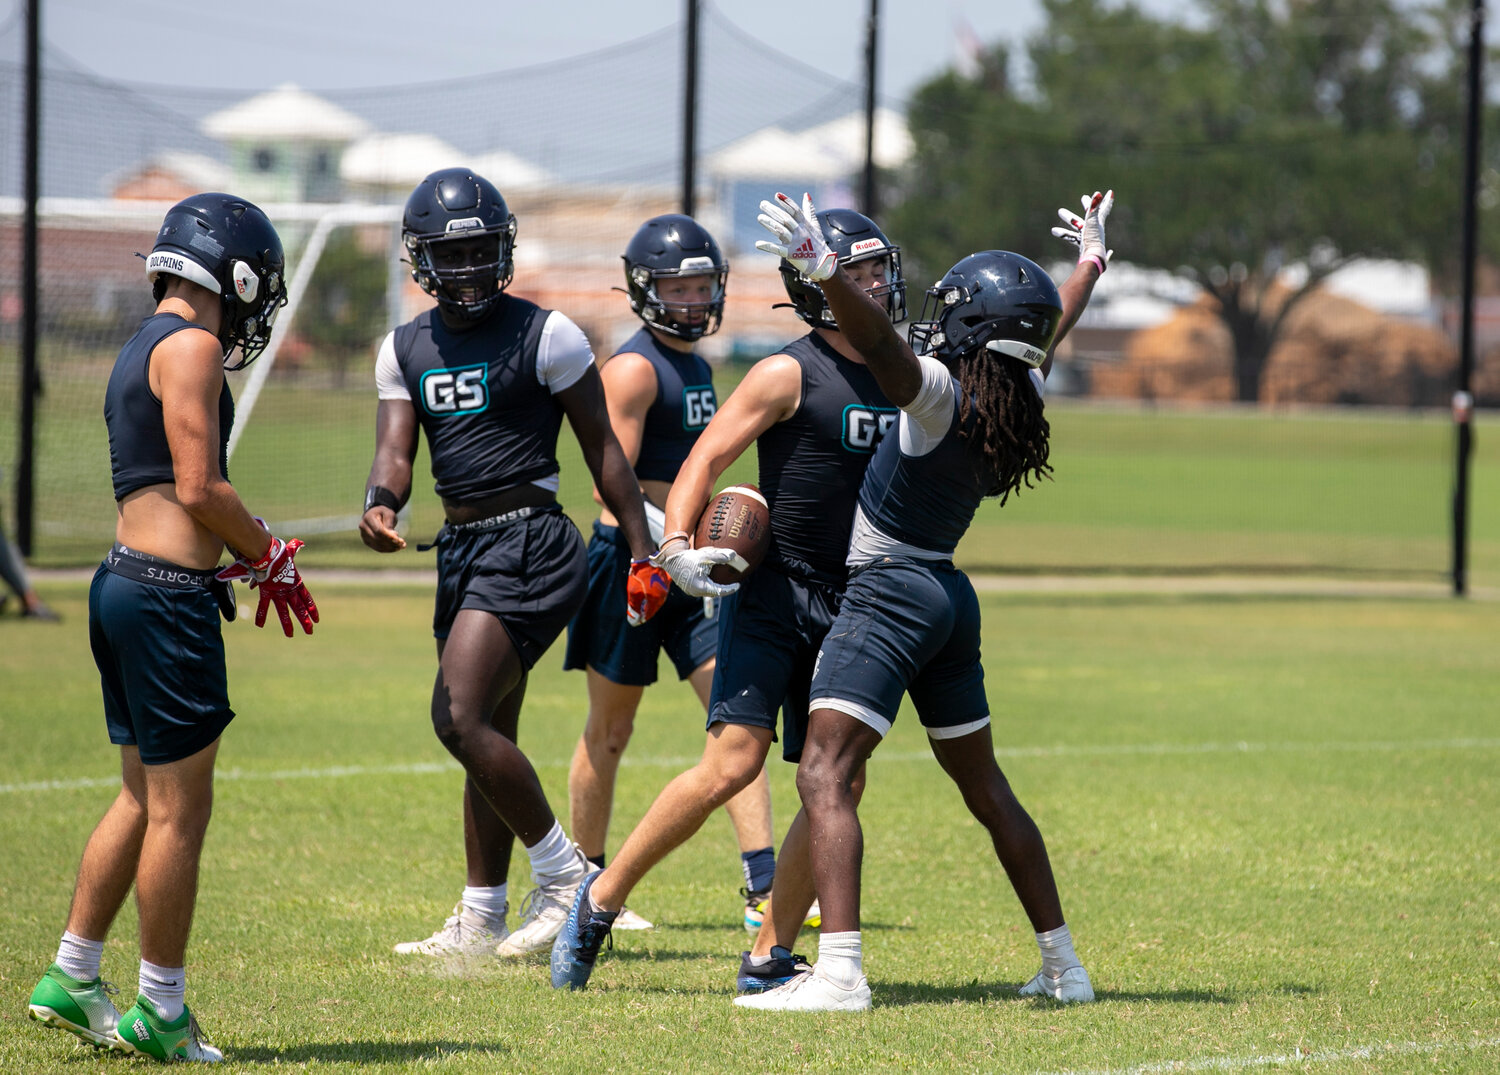 Ronnie Royal celebrates a touchdown with his Gulf Shores teammates during the Dolphins’ pool play contest against Saraland at the Foley Sports Tourism Complex last Thursday, June 29, as part of the Foley 7-on-7 Showdown. Royal said this year’s team has its sights set on replicating last year’s success that saw the school’s first state quarterfinal berth.